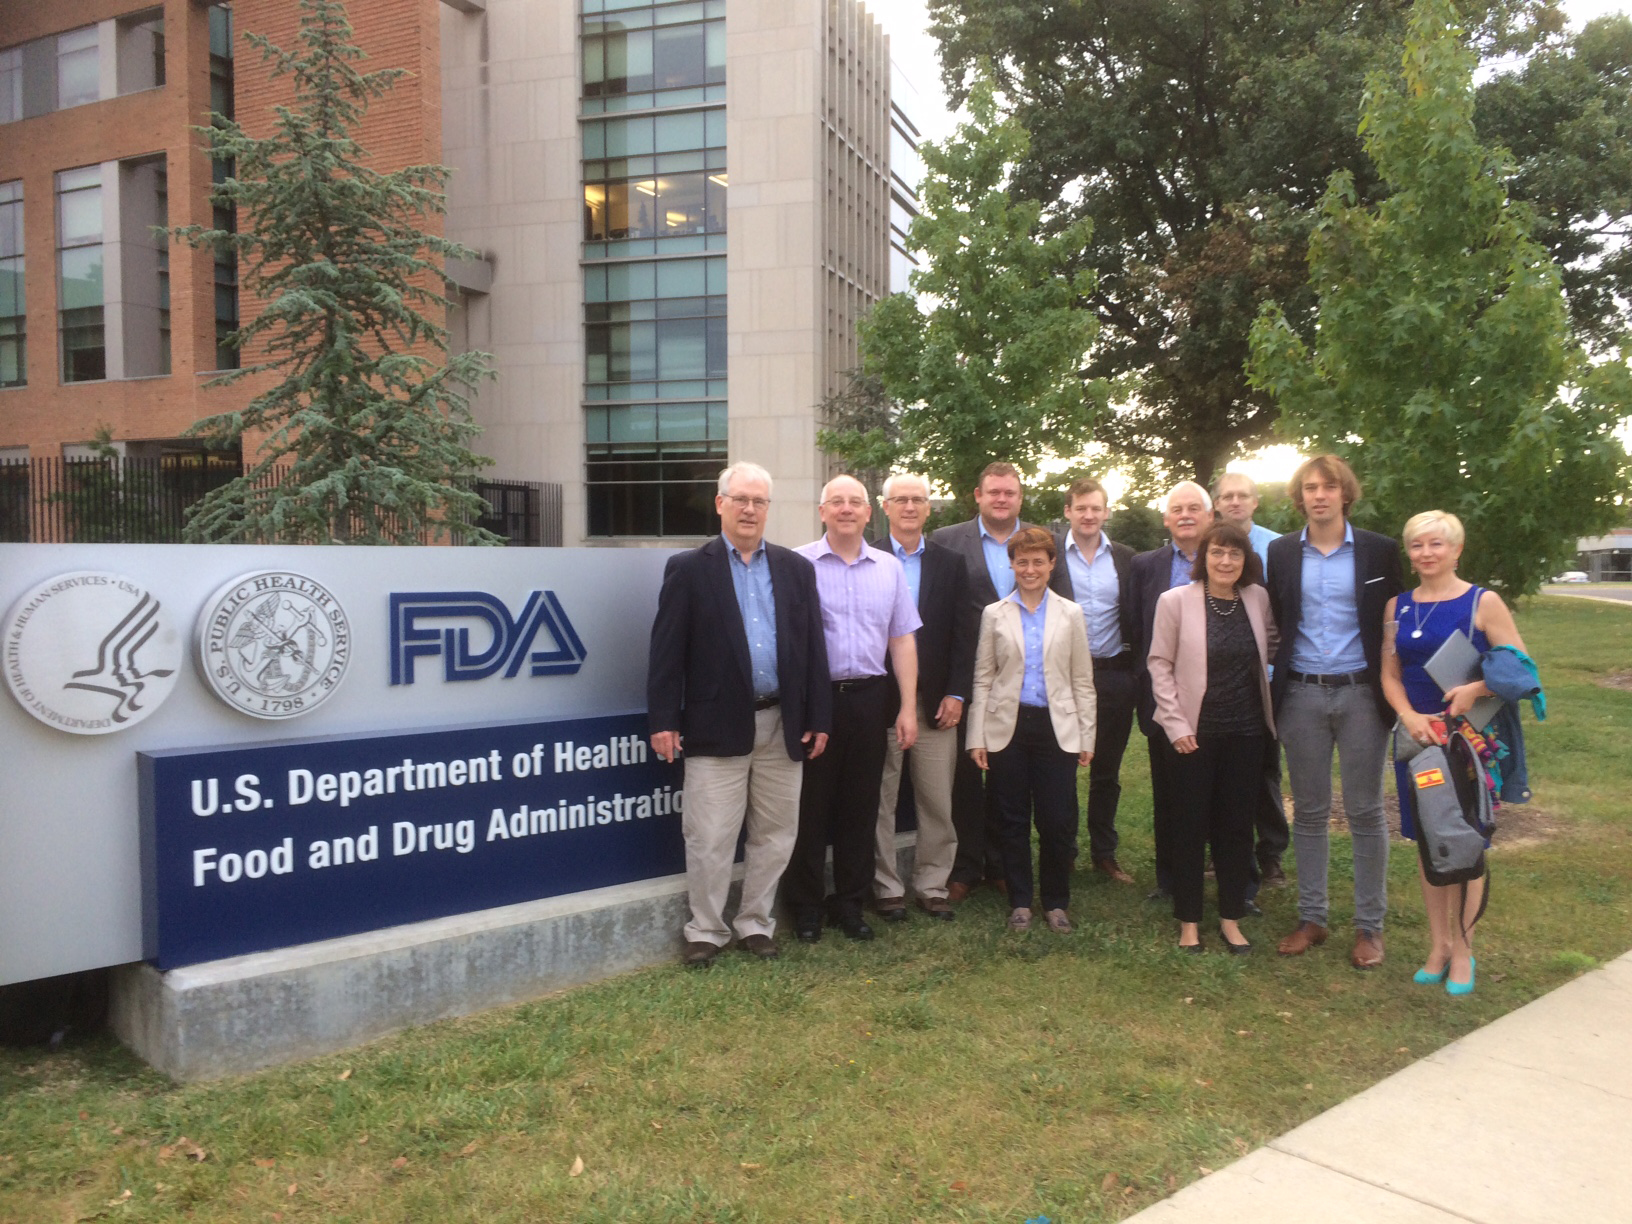 Dr. Amidon and colleagues at the FDA 